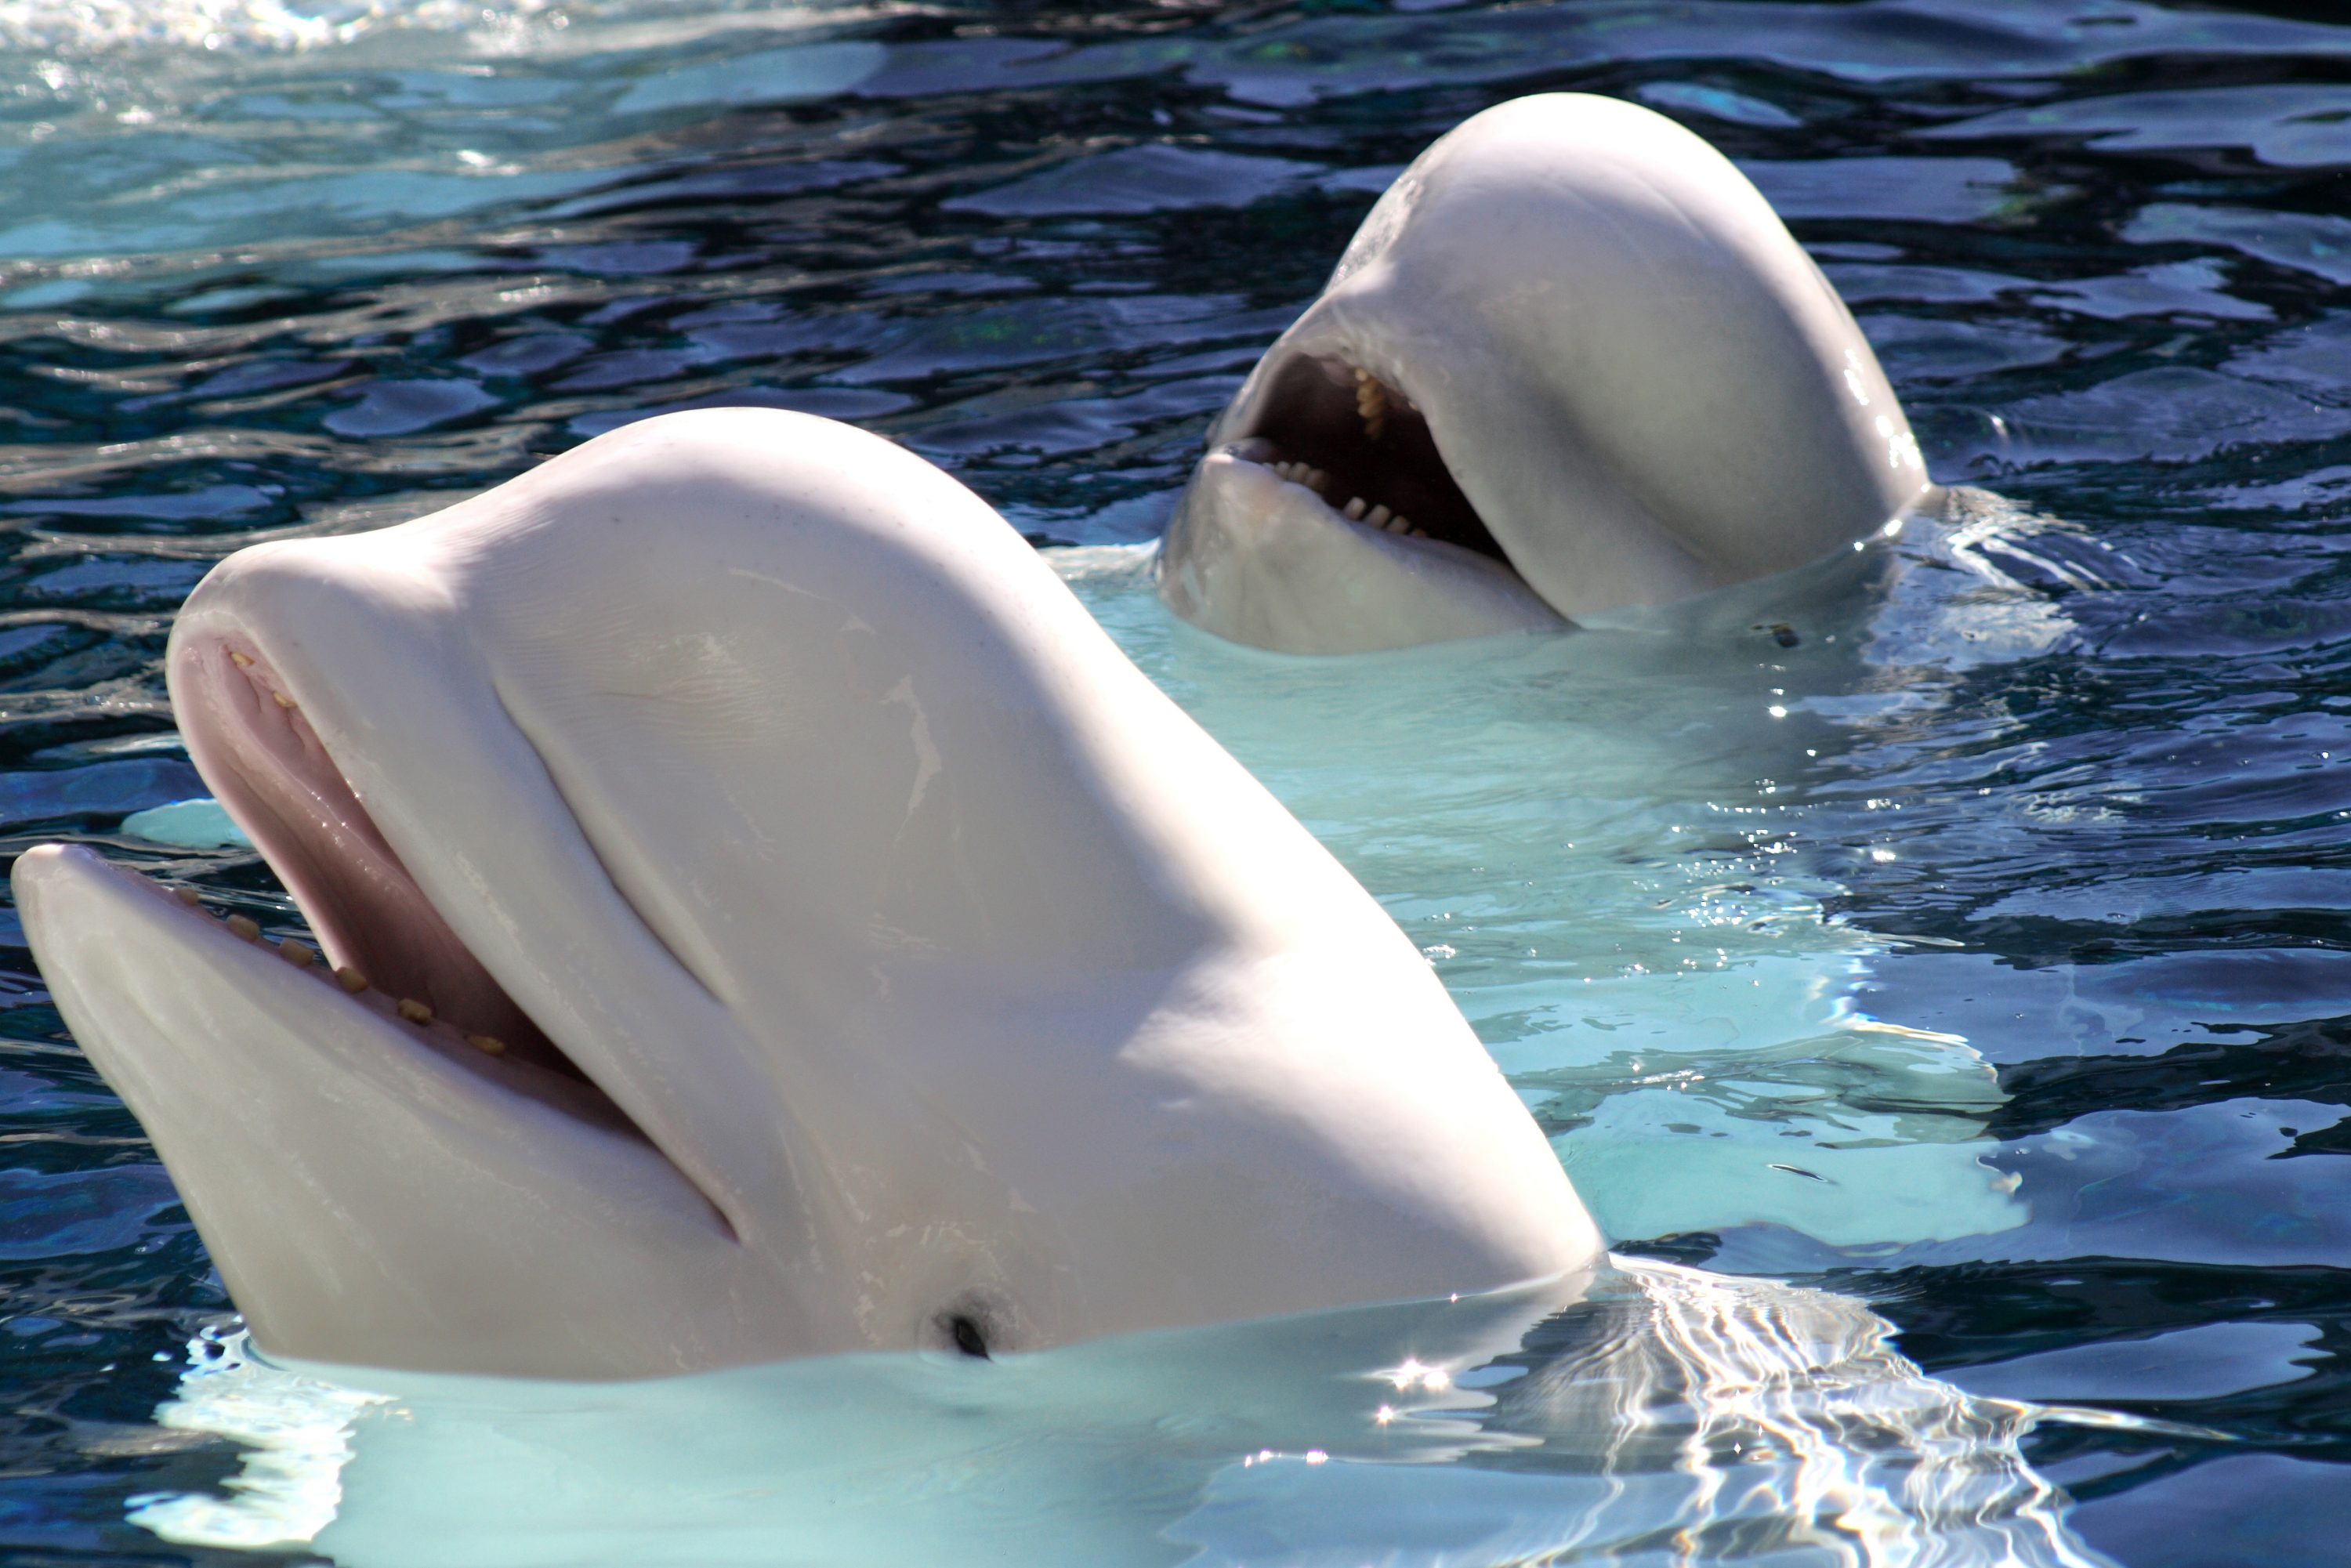 A pair of beluga whales with their heads above water. (iStock Photo)